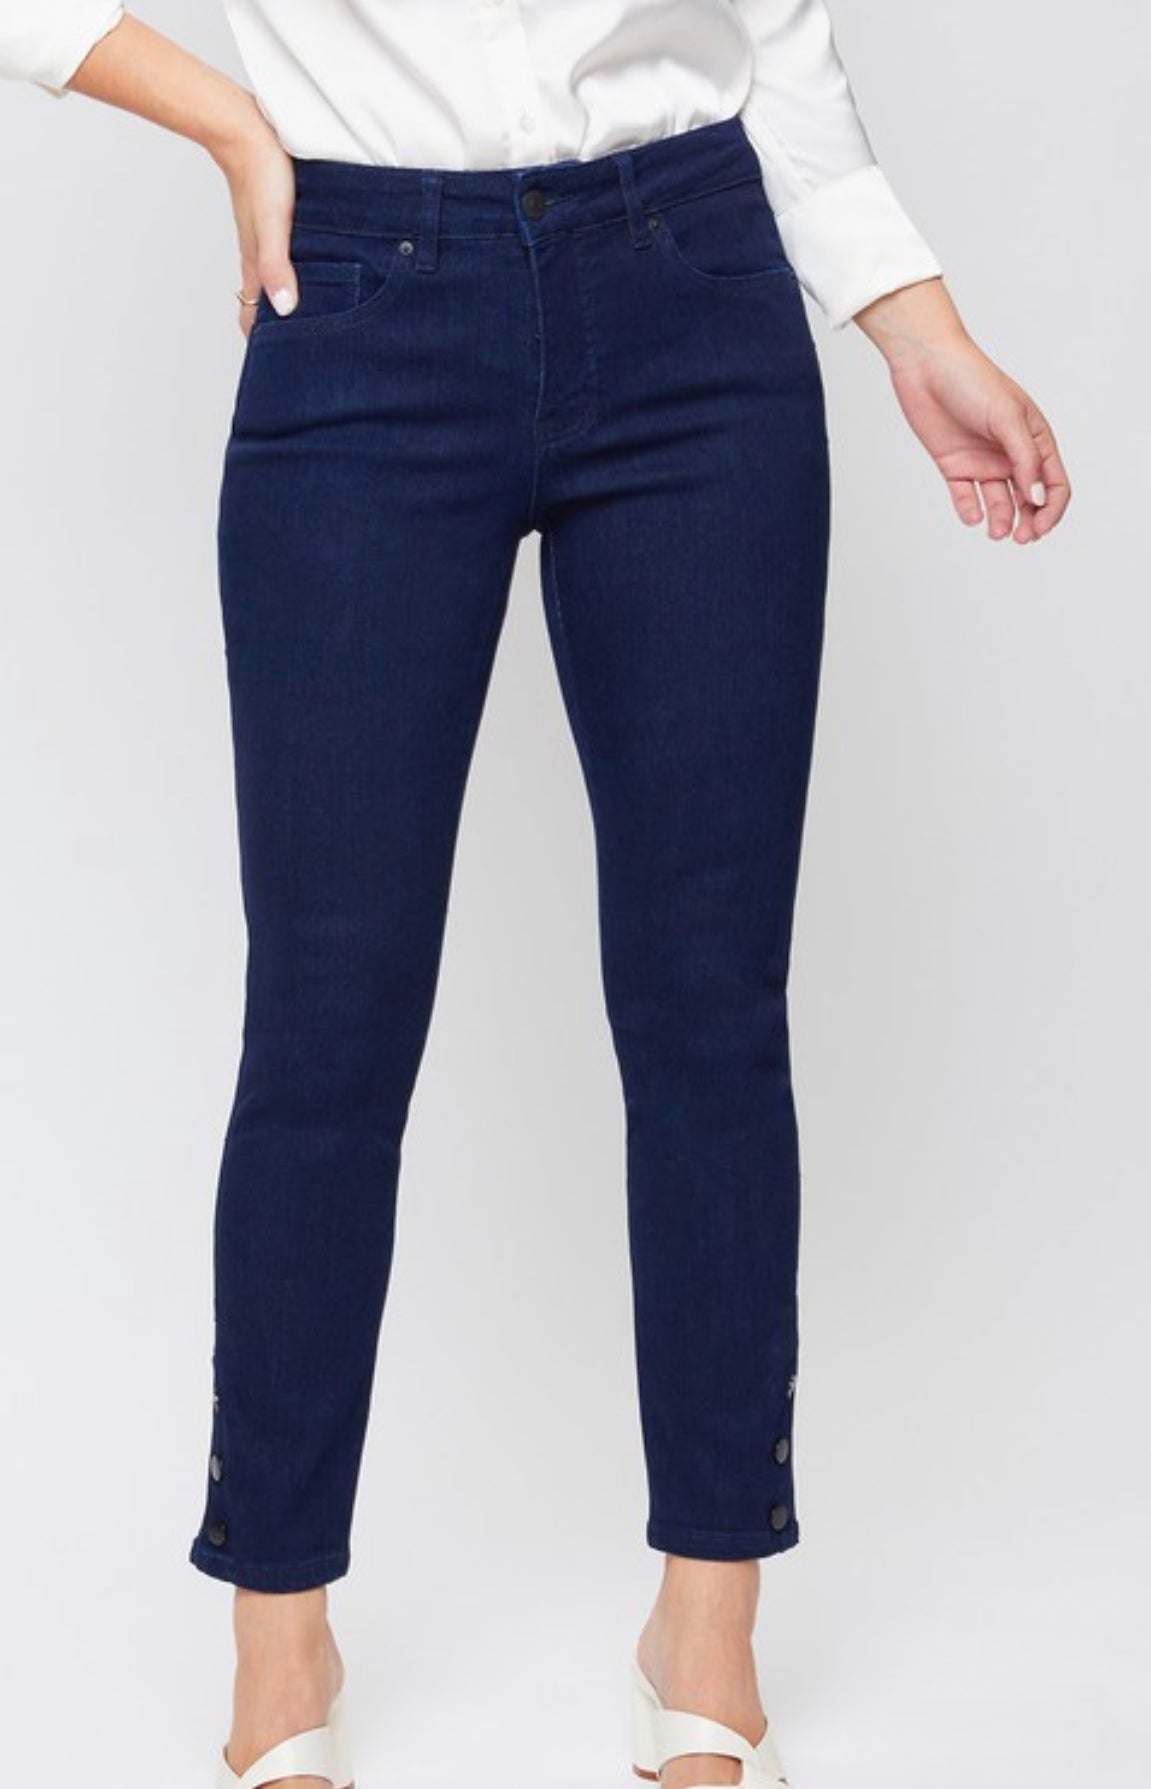 Kelsea Mid-Rise Ankle Skinny Jean with Tummy Control